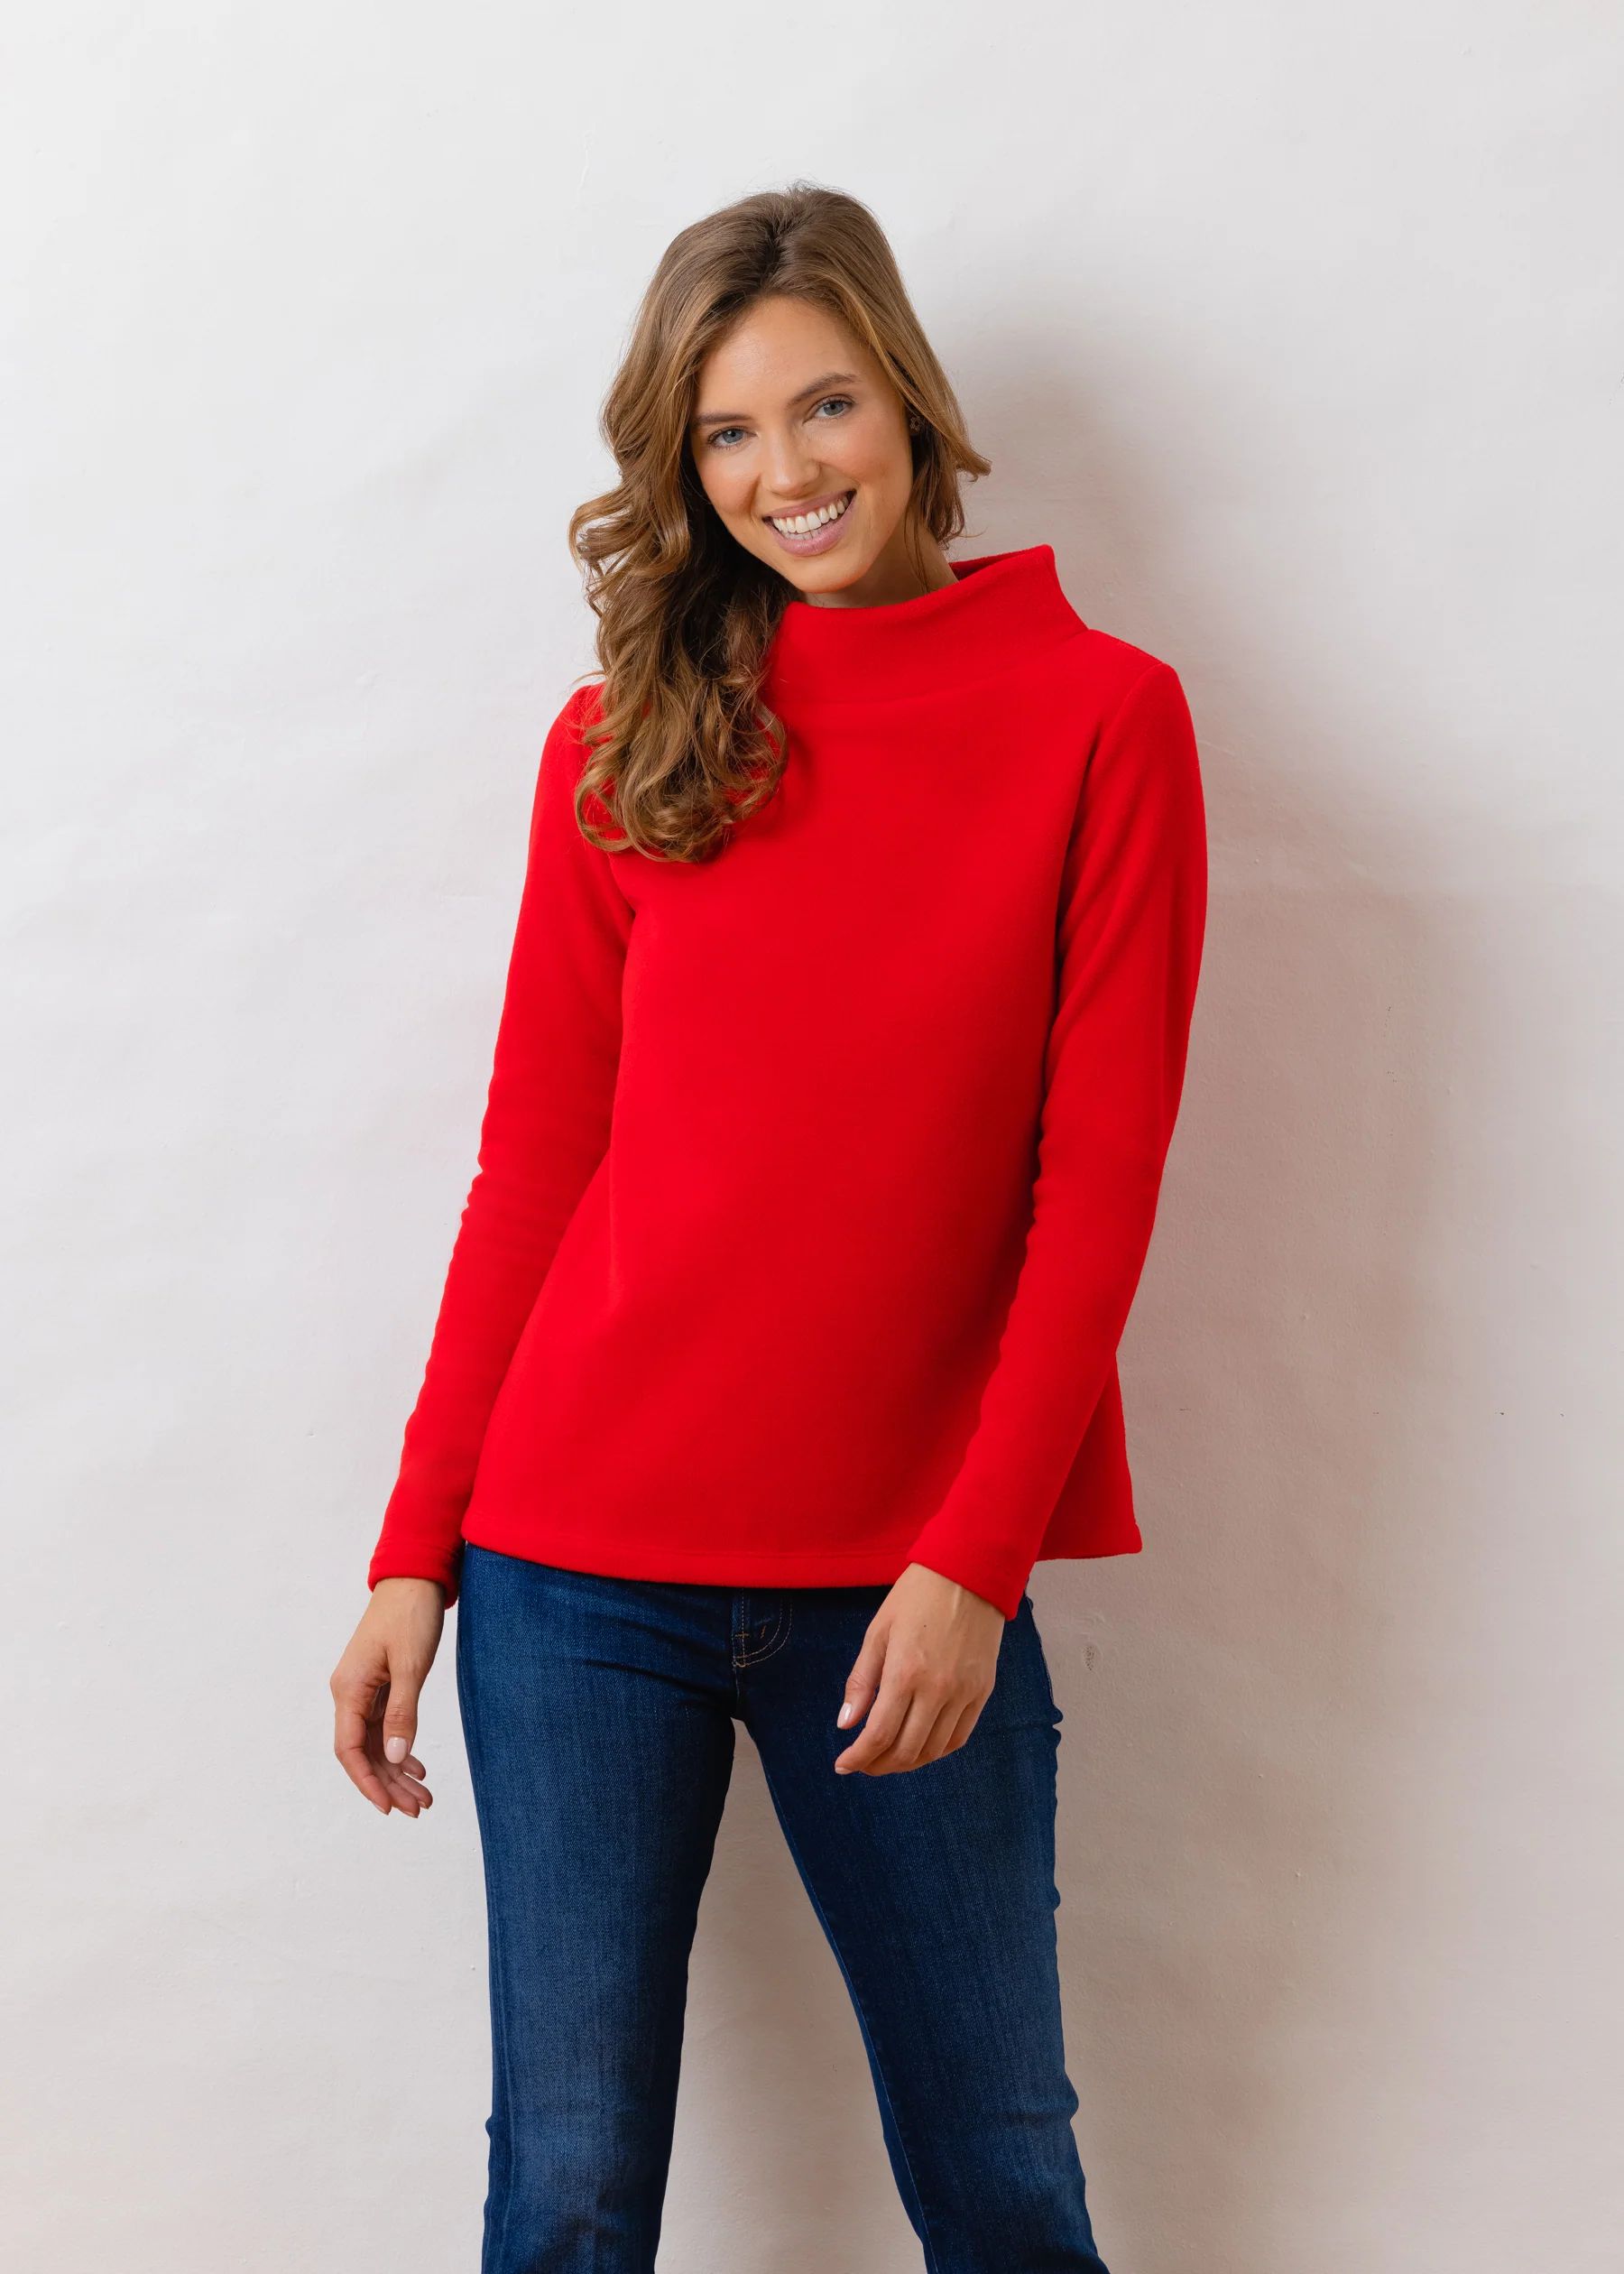 Greenpoint Boatneck in Vello Fleece (Red) | Dudley Stephens